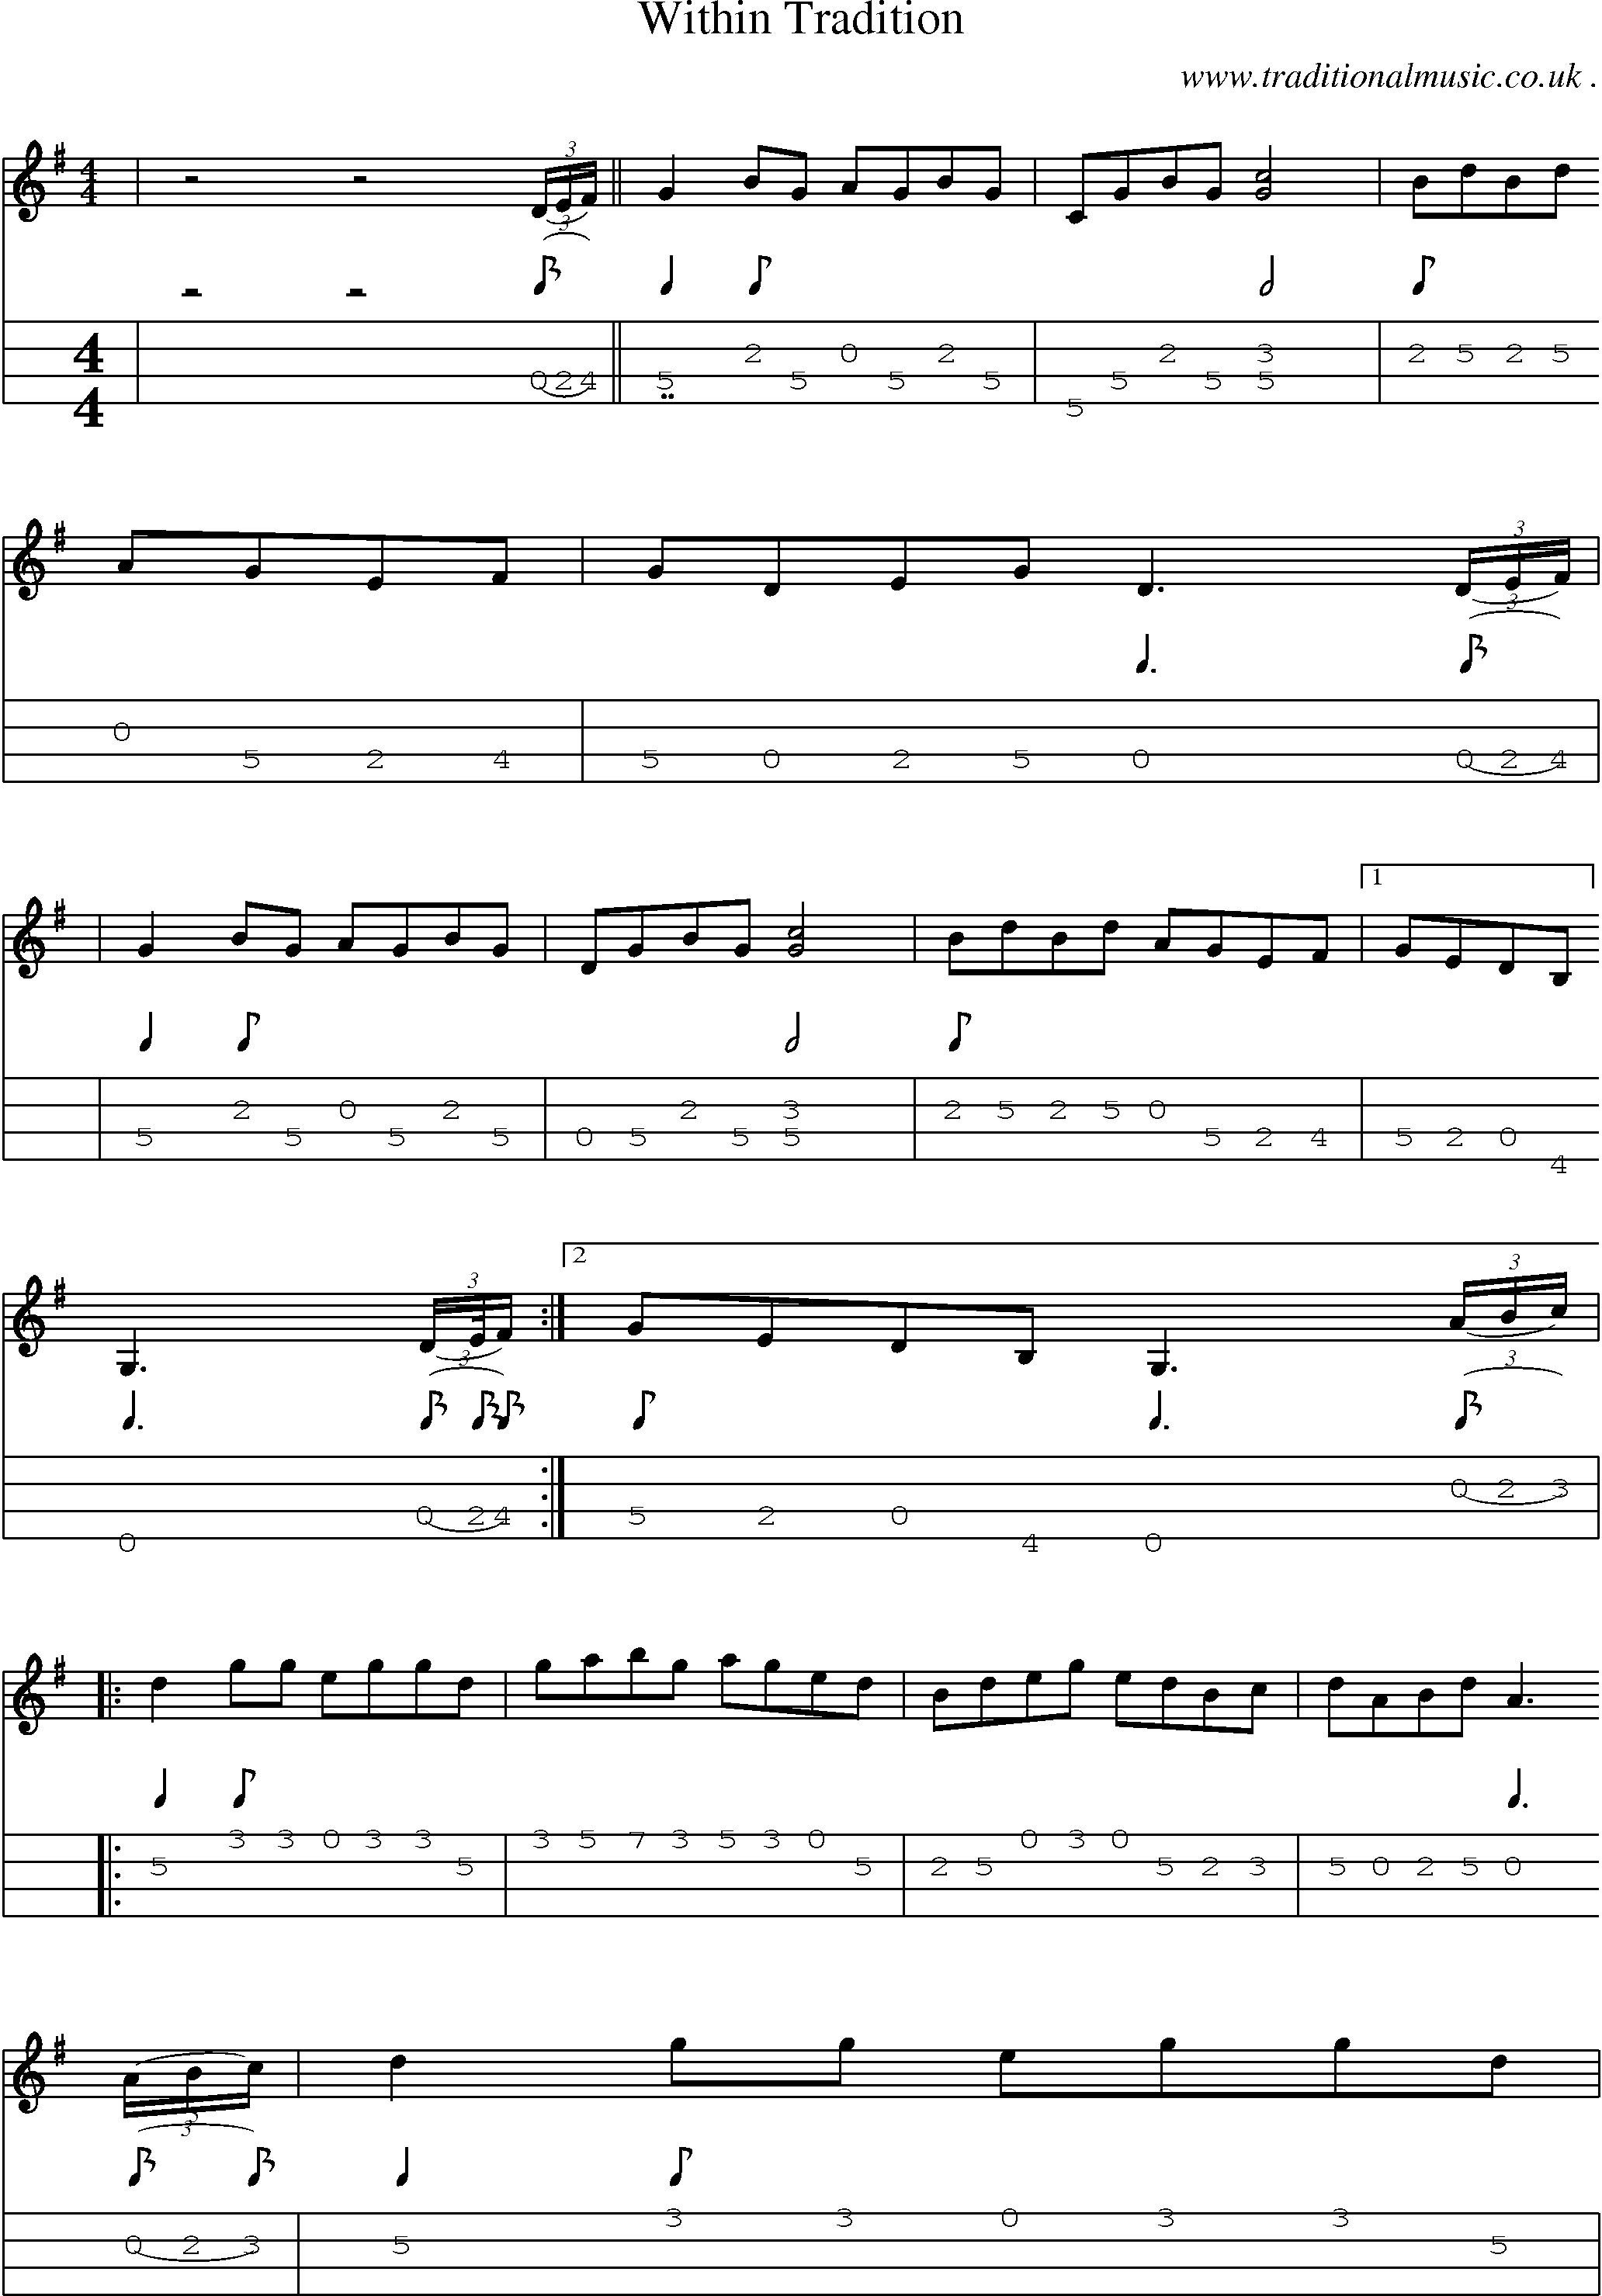 Music Score and Mandolin Tabs for Within Tradition